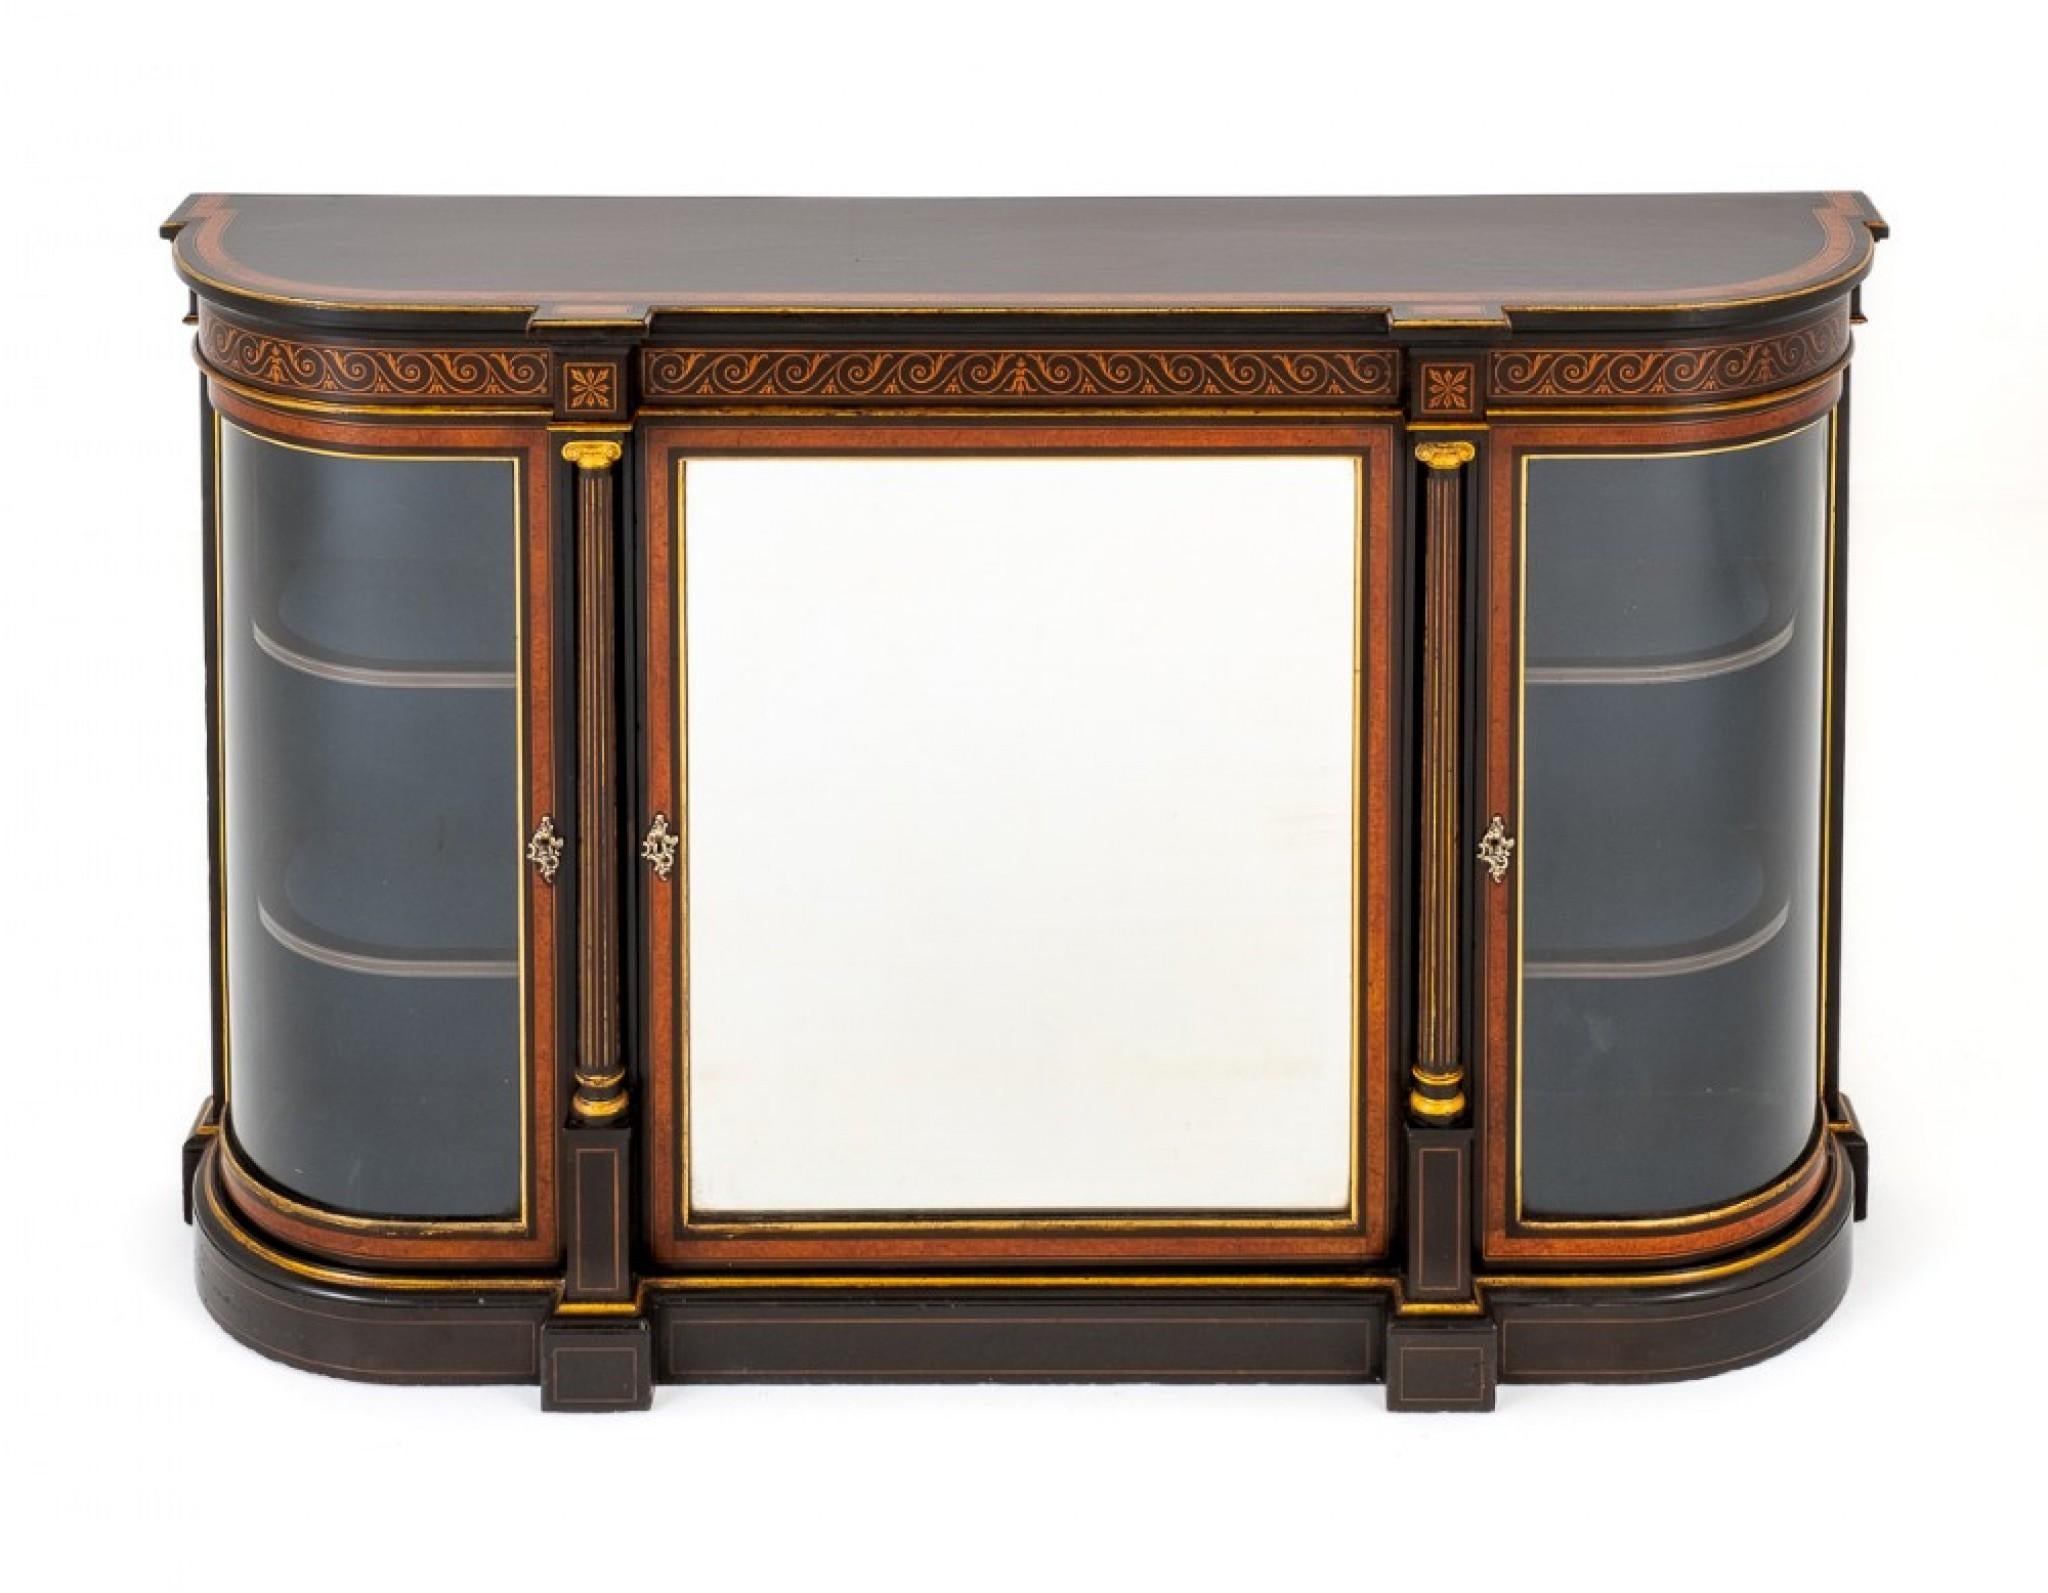 This Victorian ebonised and walnut credenza stands upon a plinth base.
circa 1860
Featuring a mirrored central door flanked by turned and fluted columns.
Either side of the central door we have bowed display cabinets.
The frieze of the cabinet